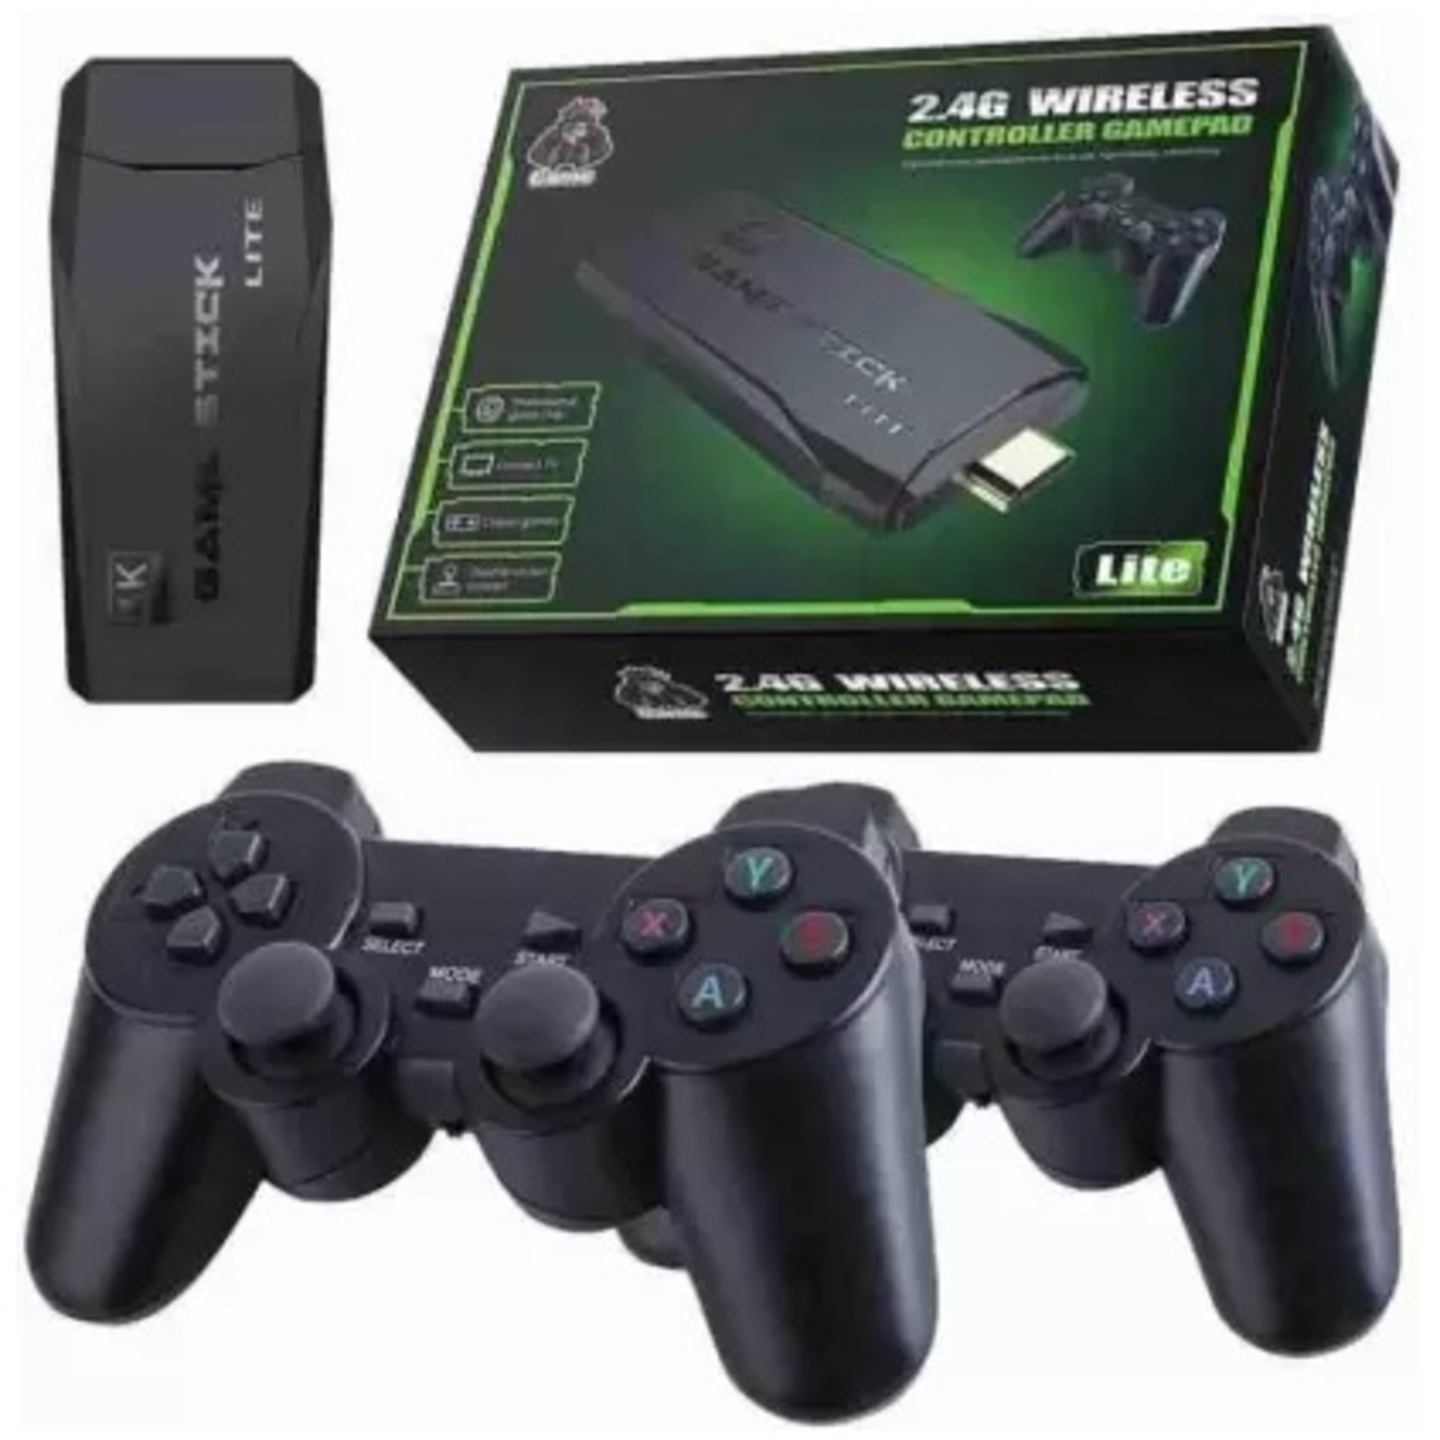 2.4G Wireless 4K Dual Player Gamepad Controller with Built-in 3000 Games